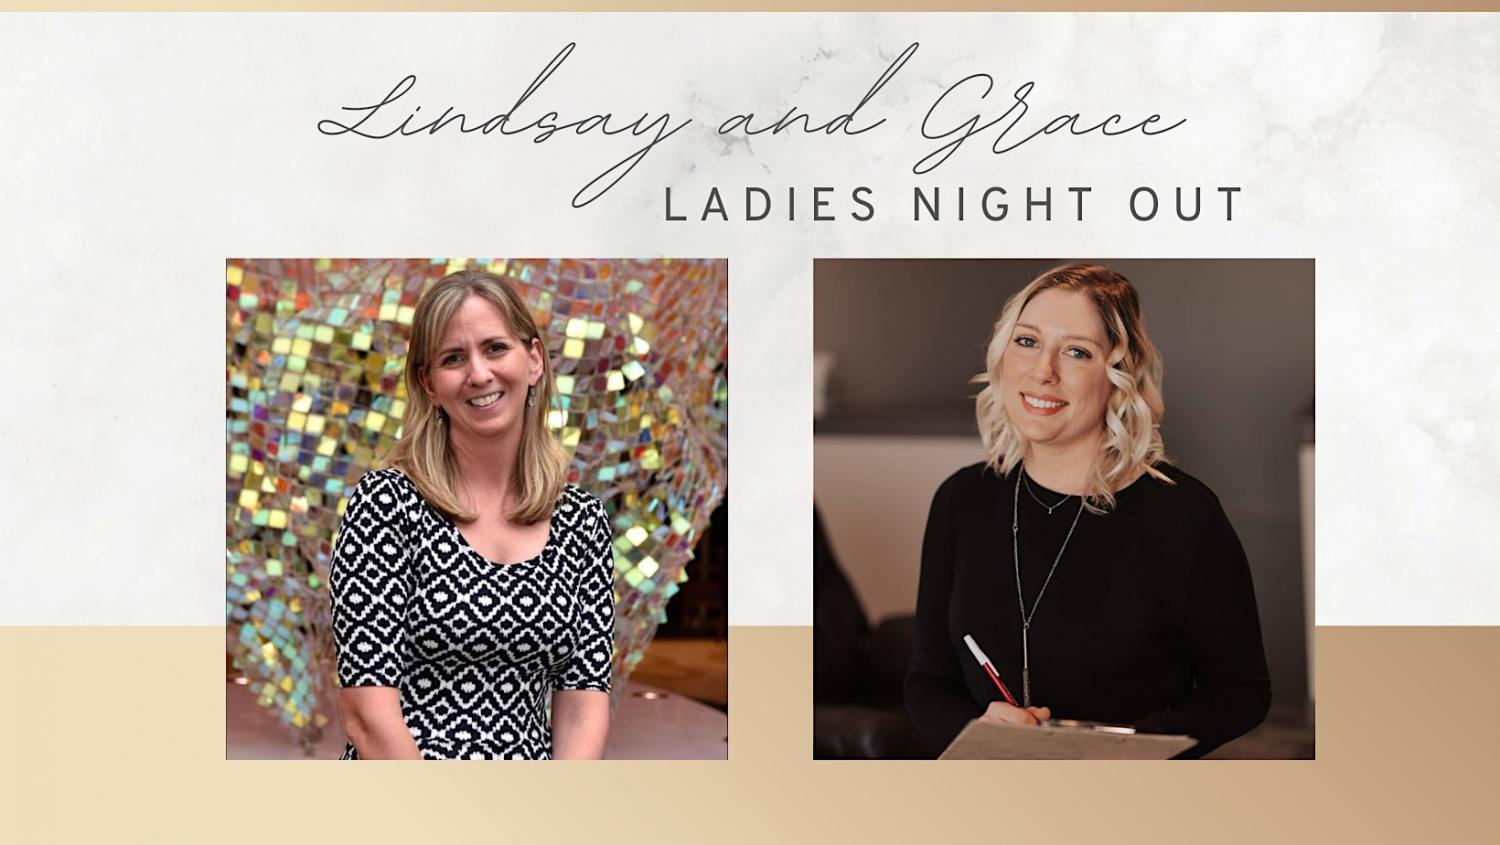 Lindsay and Grace host Ladies Night Out!
Sat Oct 22, 2:00 PM - Sat Oct 22, 4:00 PM
in 2 days